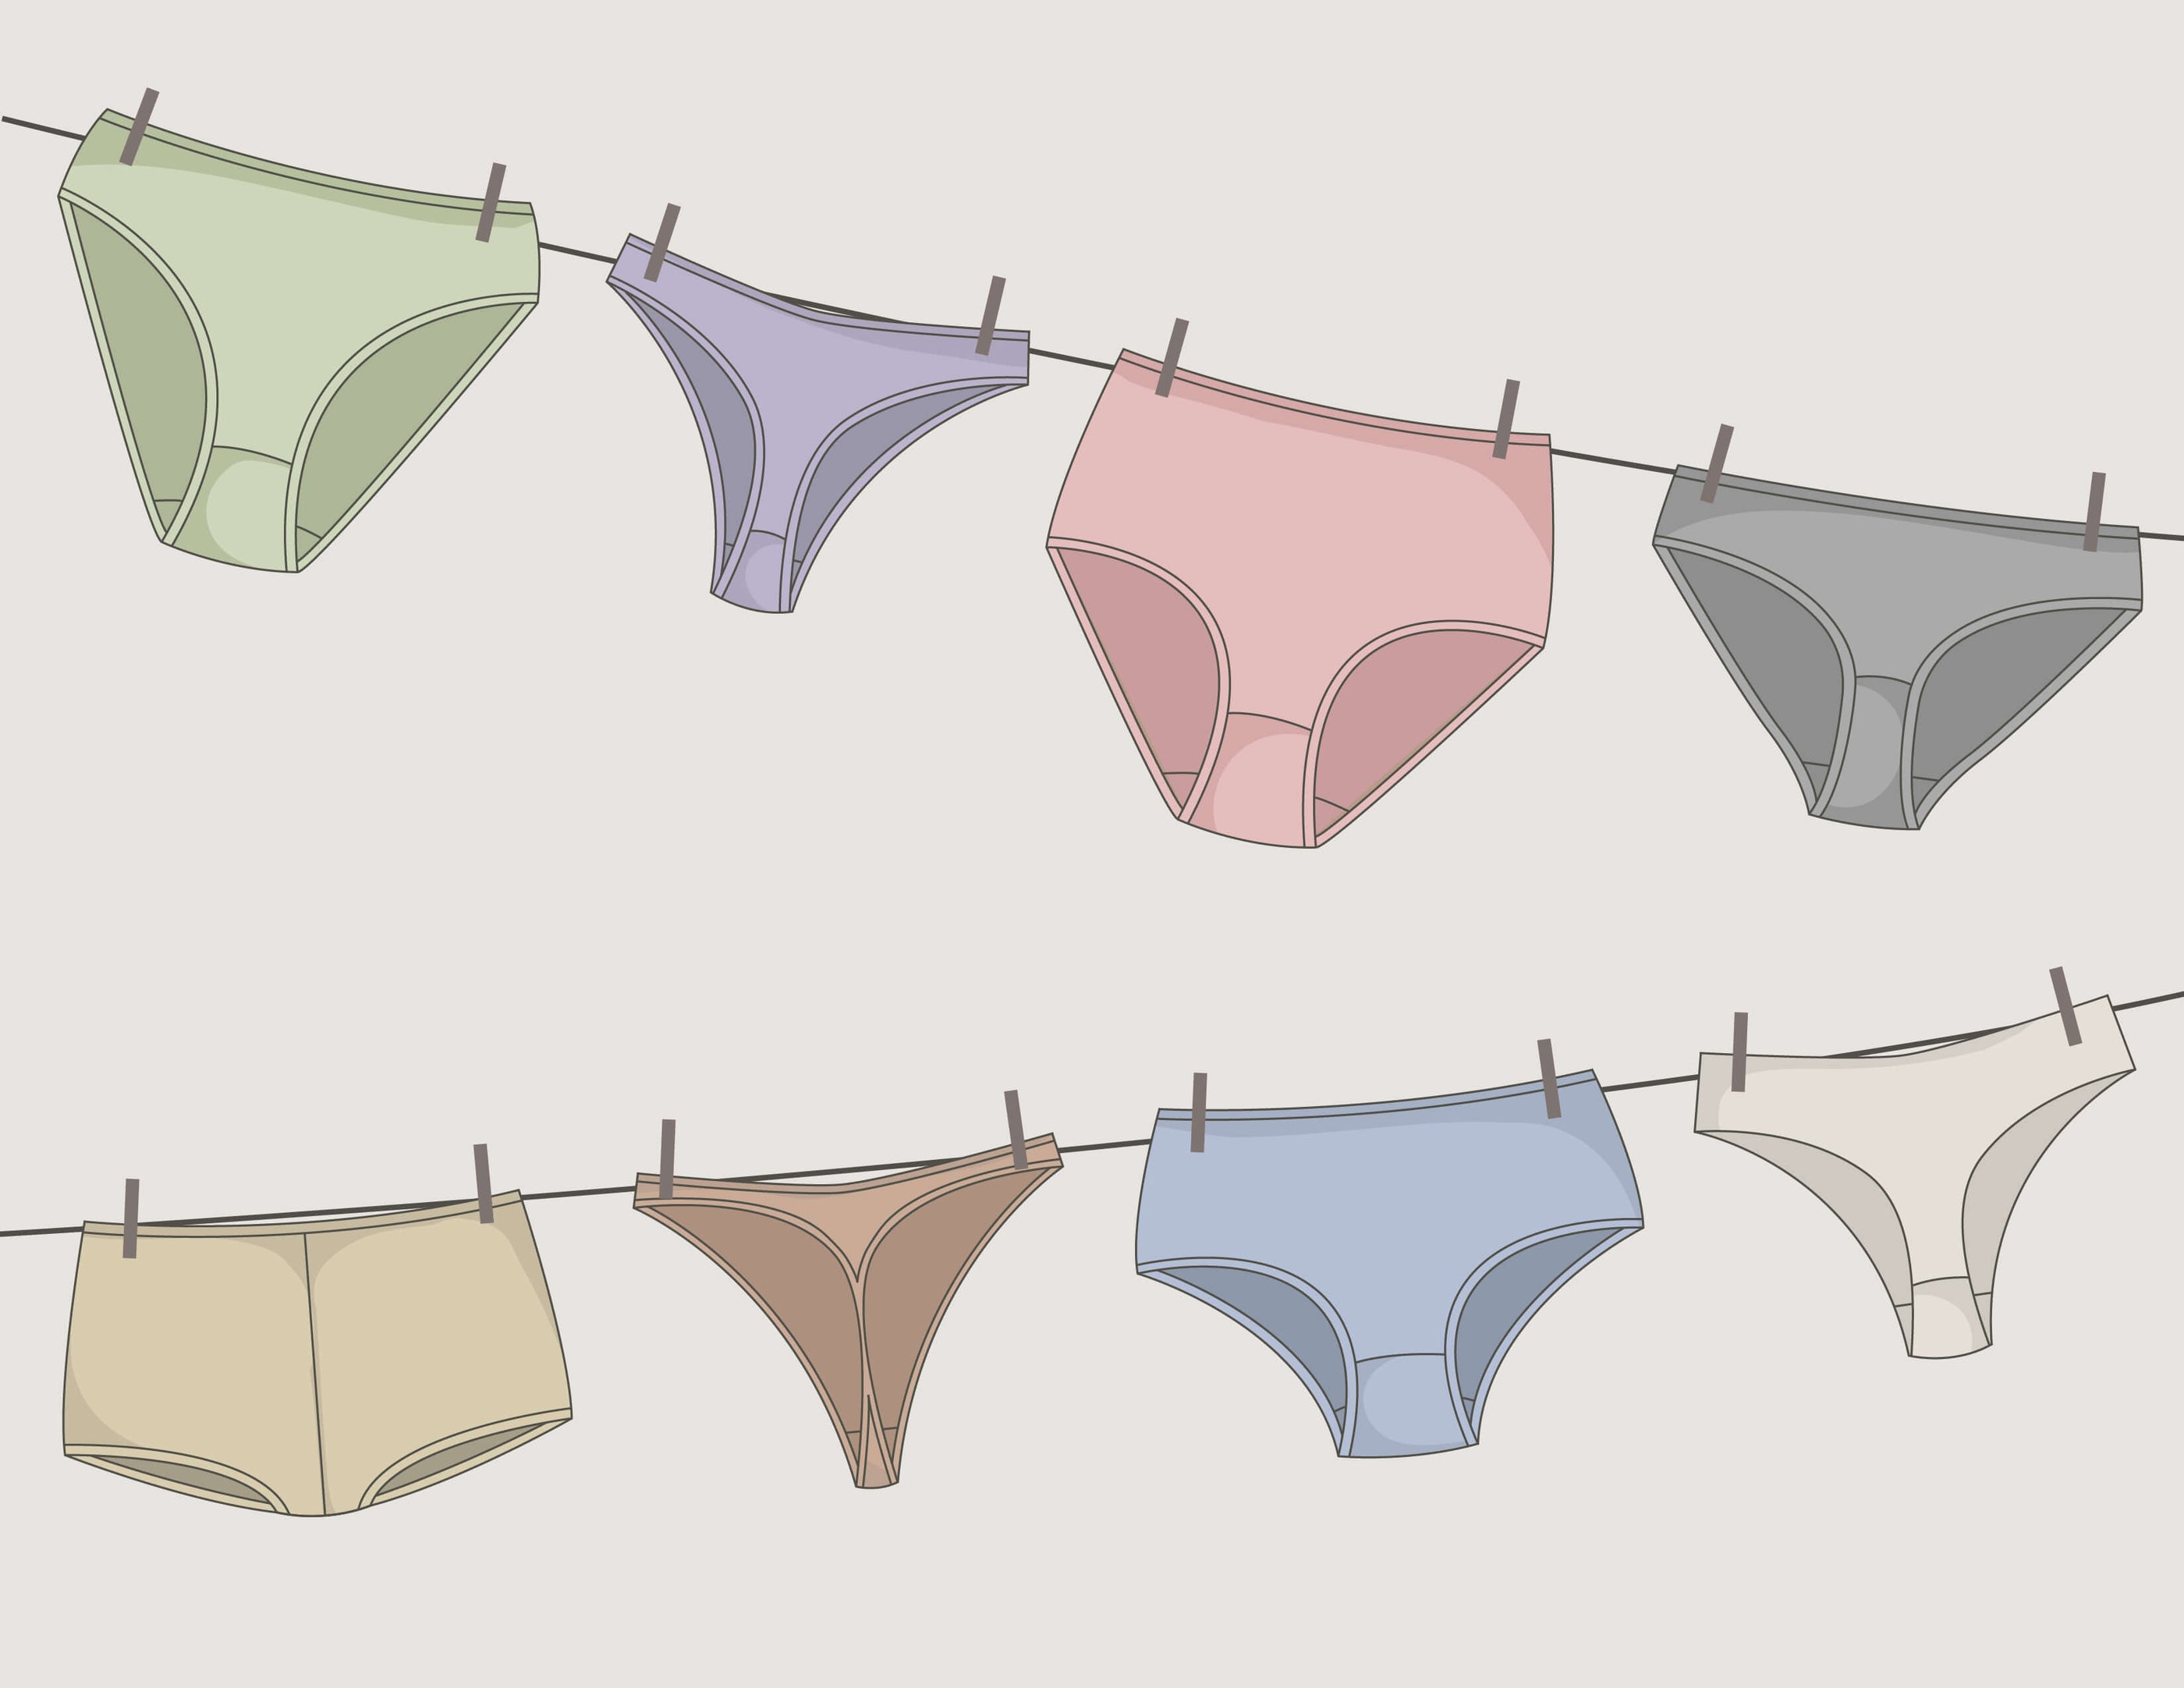 How does underwear get holes? How can this be prevented? – Kearo